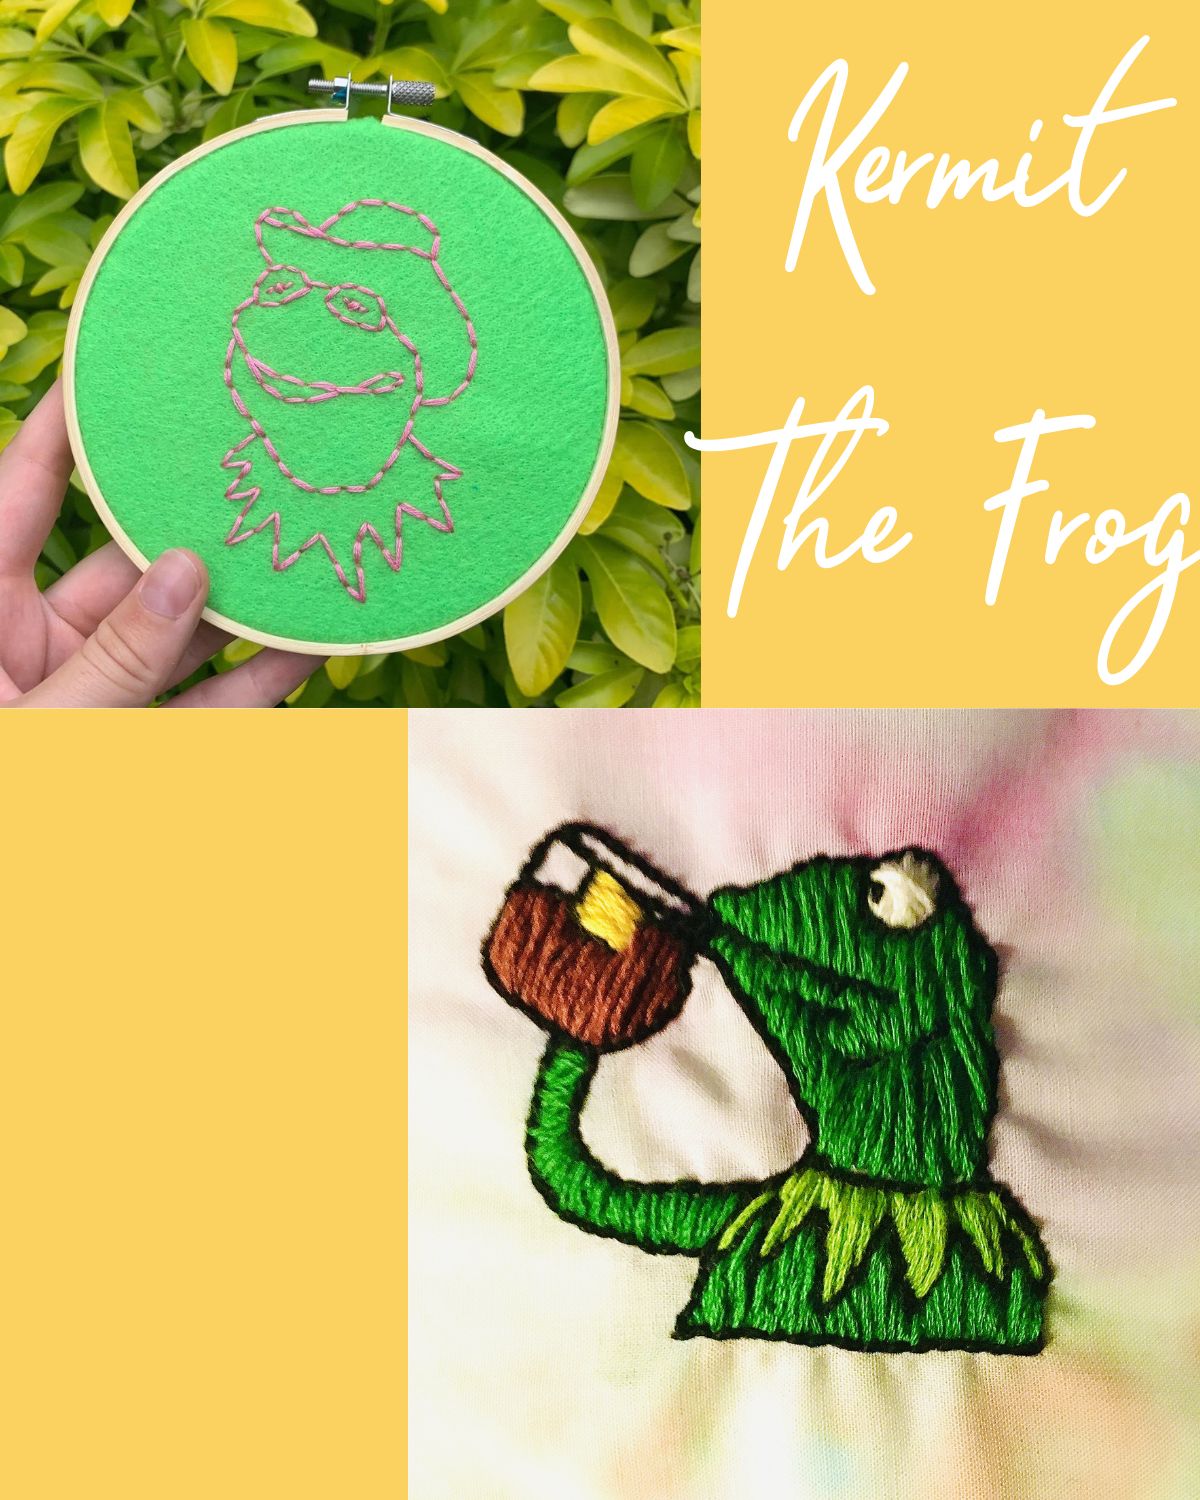 Kermit the frog embroidery 